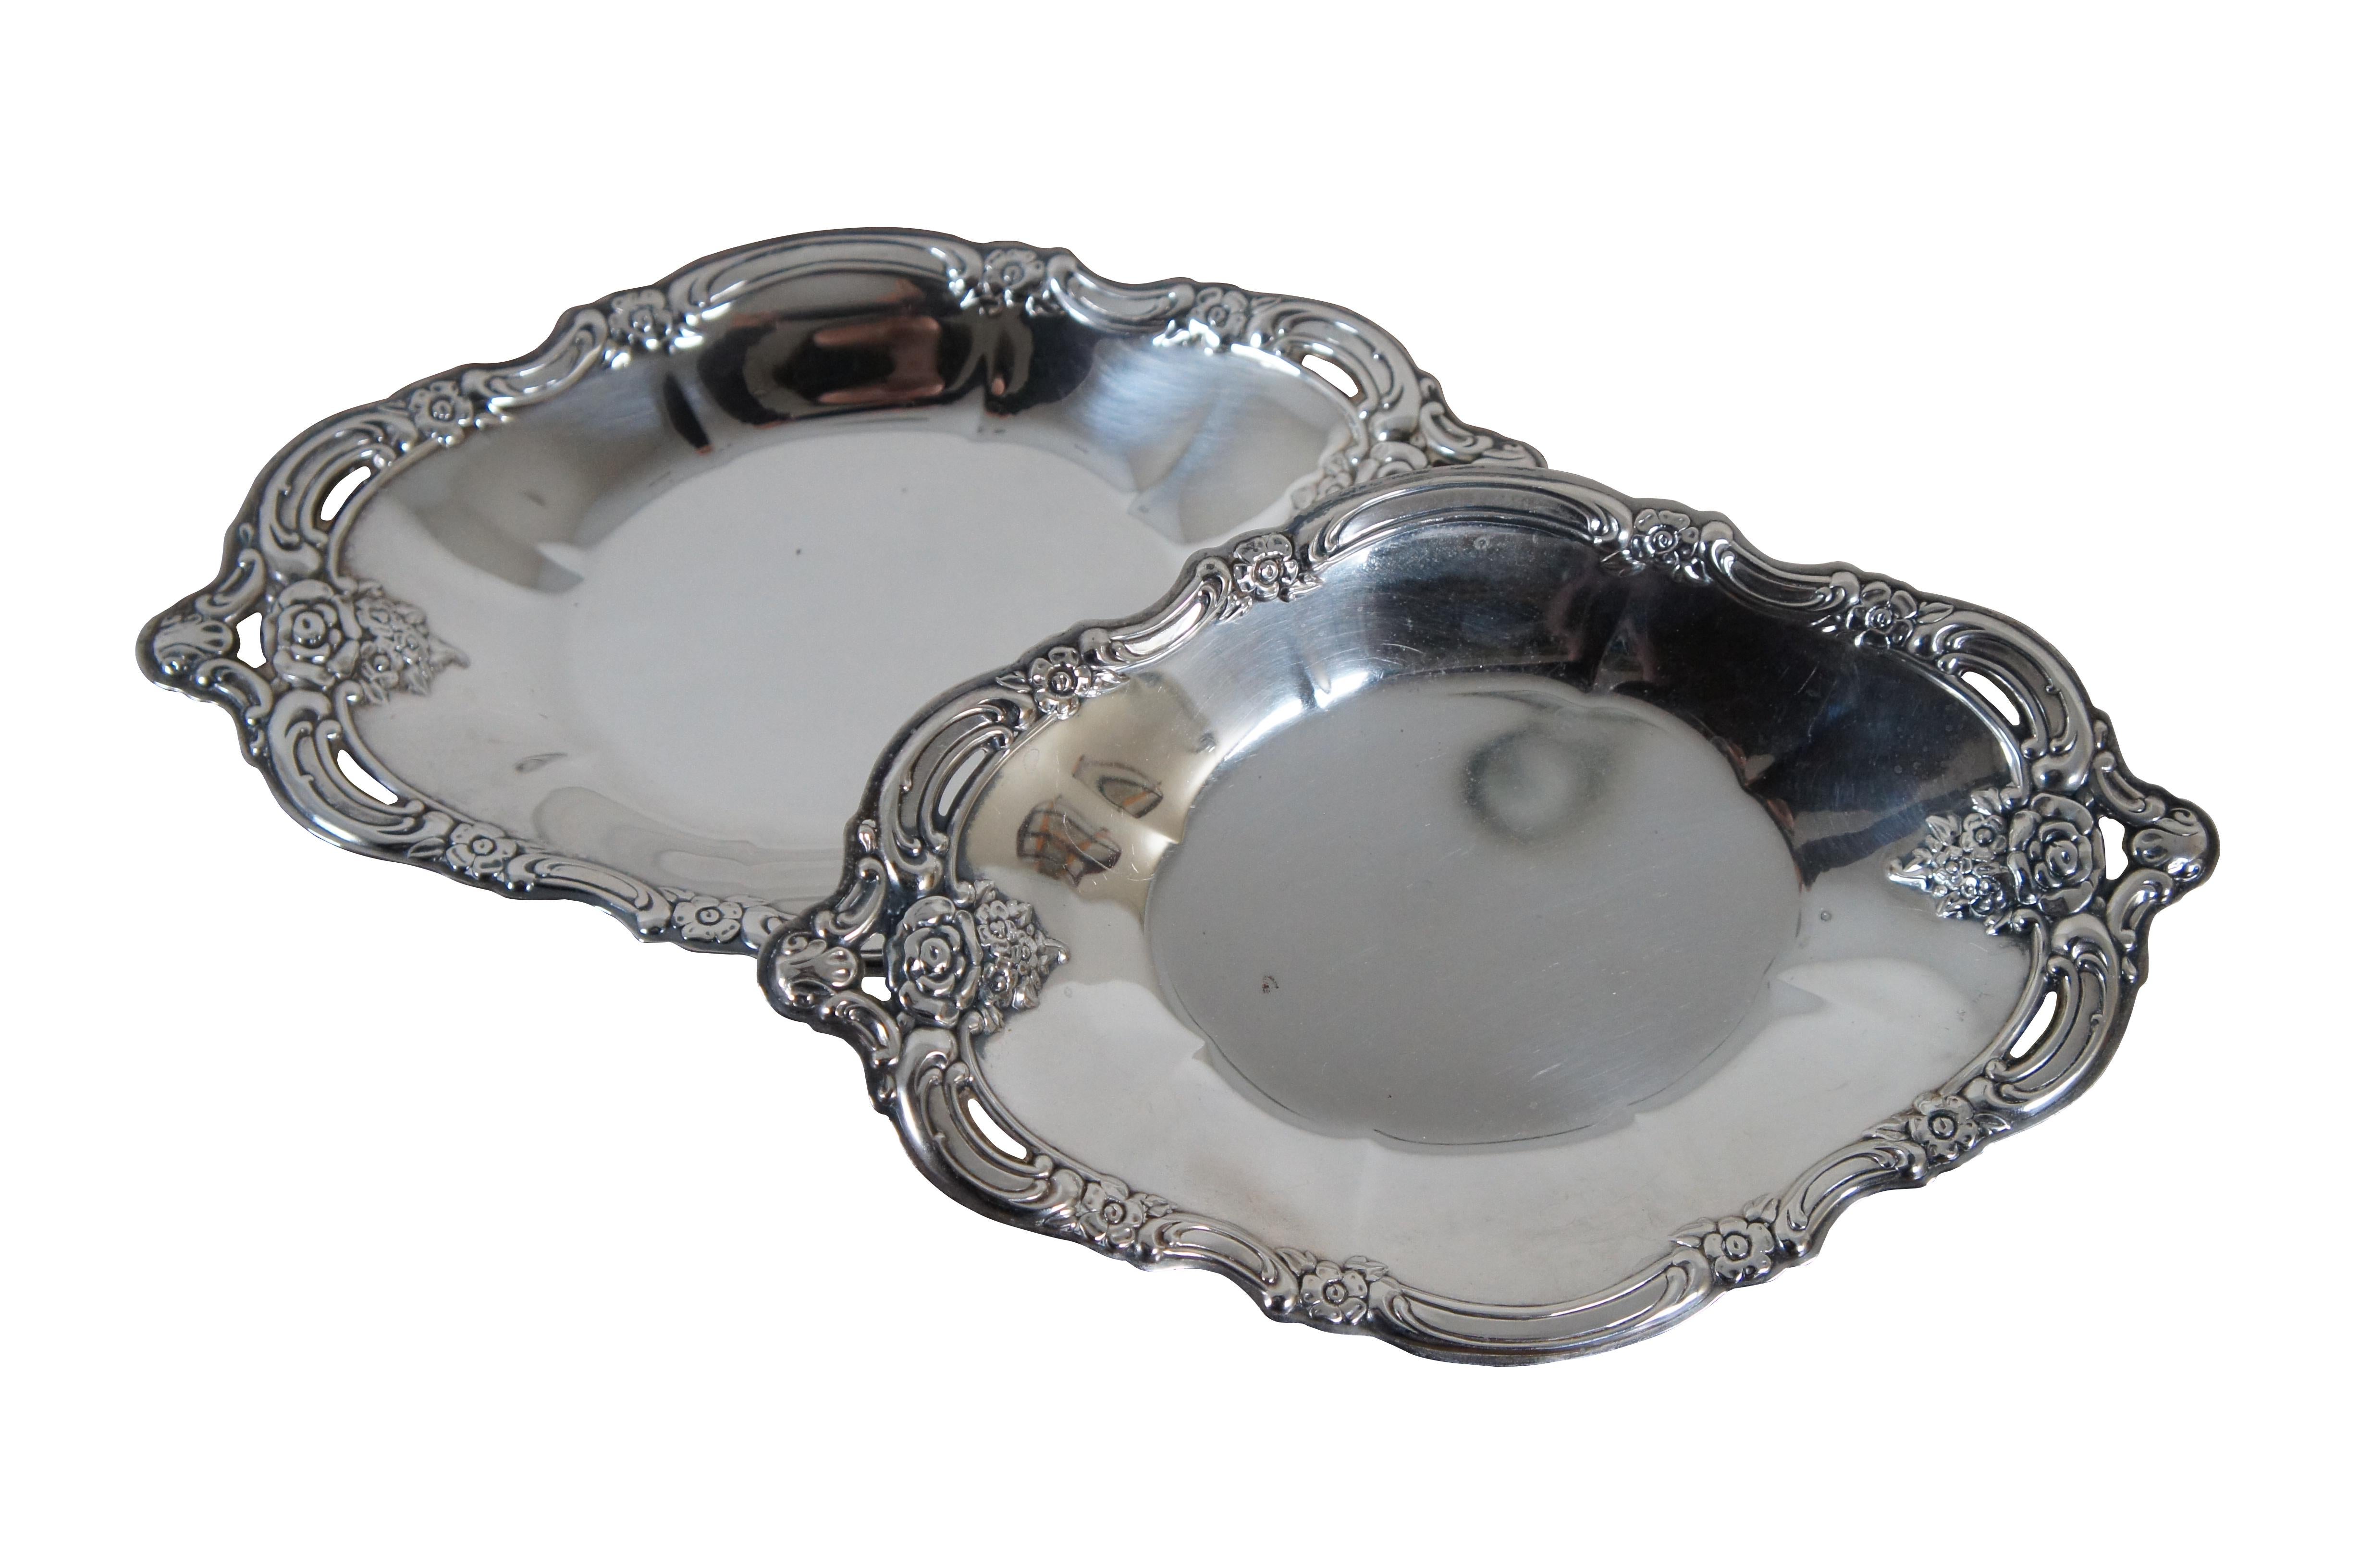 Pair of Community silverplate bon bon bowls / oval dishes in the Silver baroque  Artistry pattern, featuring scrolls and flowers lining the scalloped edge with pierced accents.

